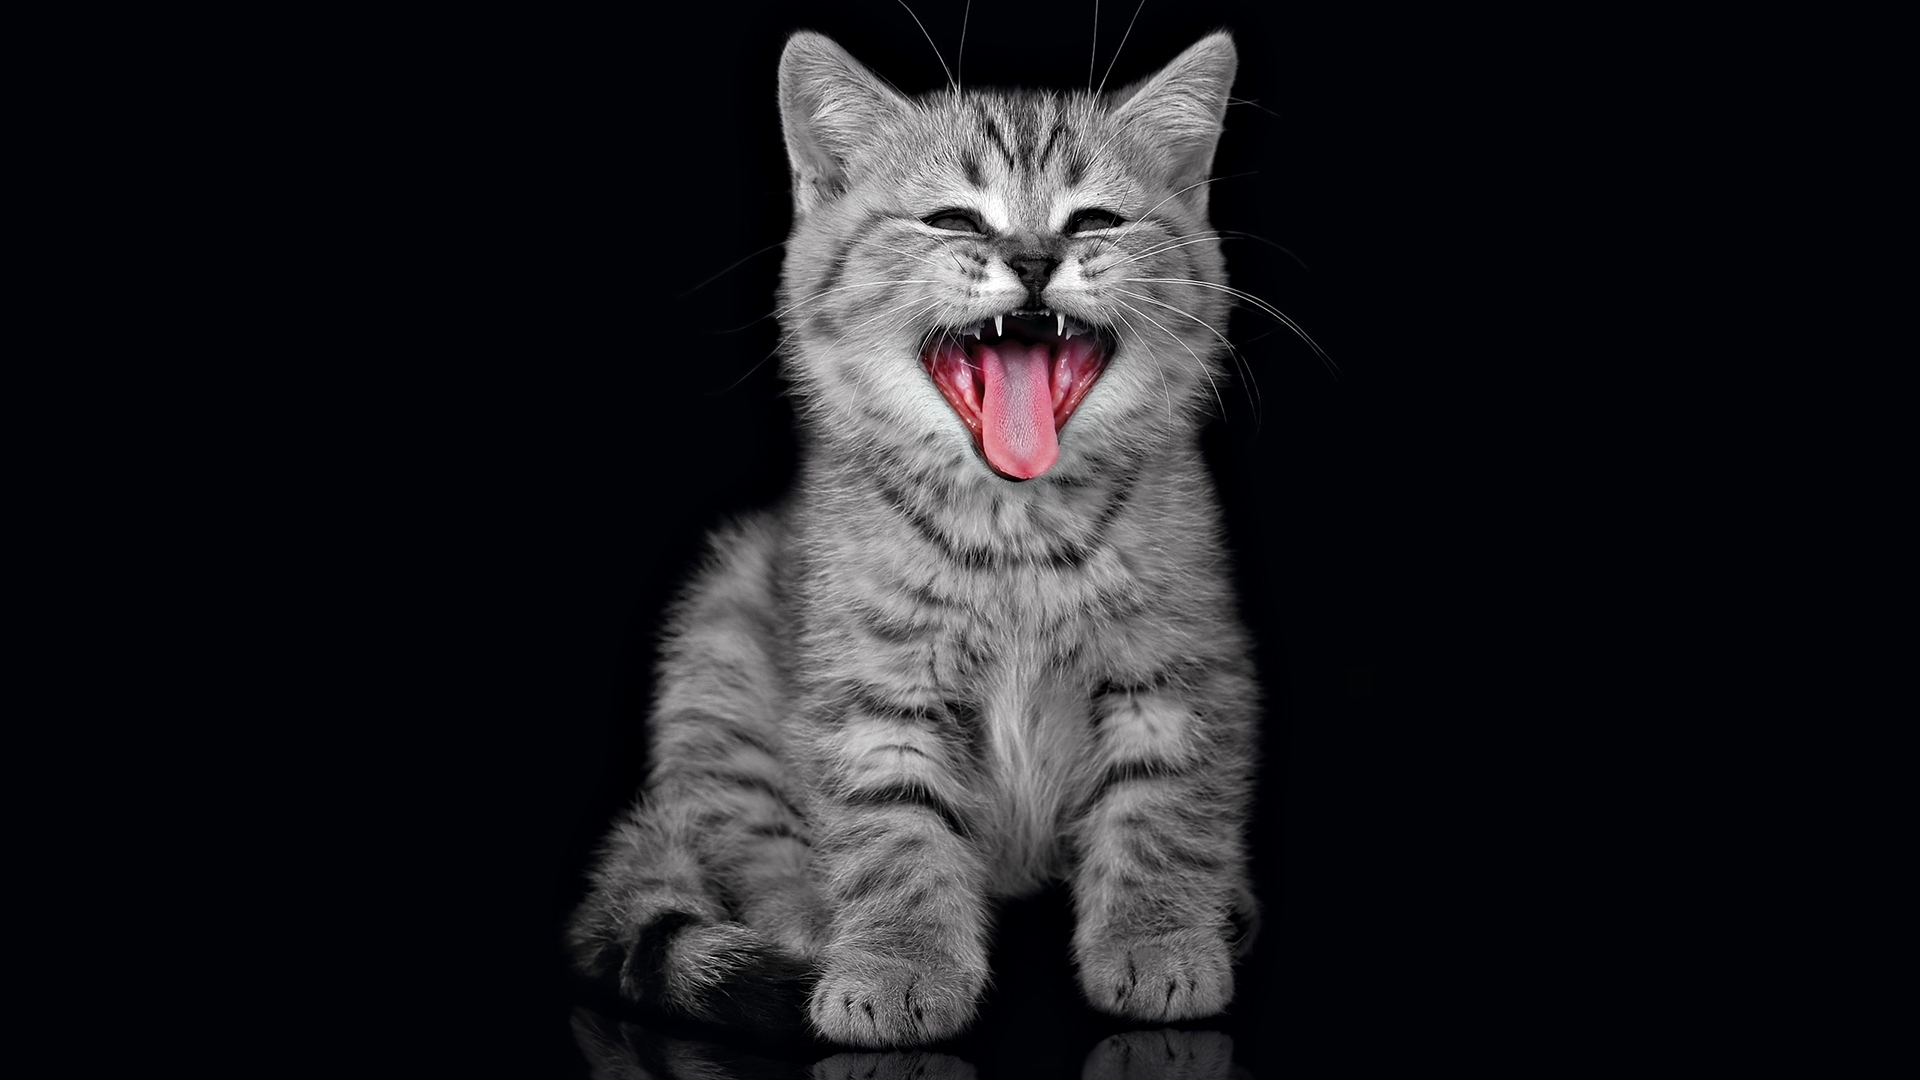 Popular Cats background images